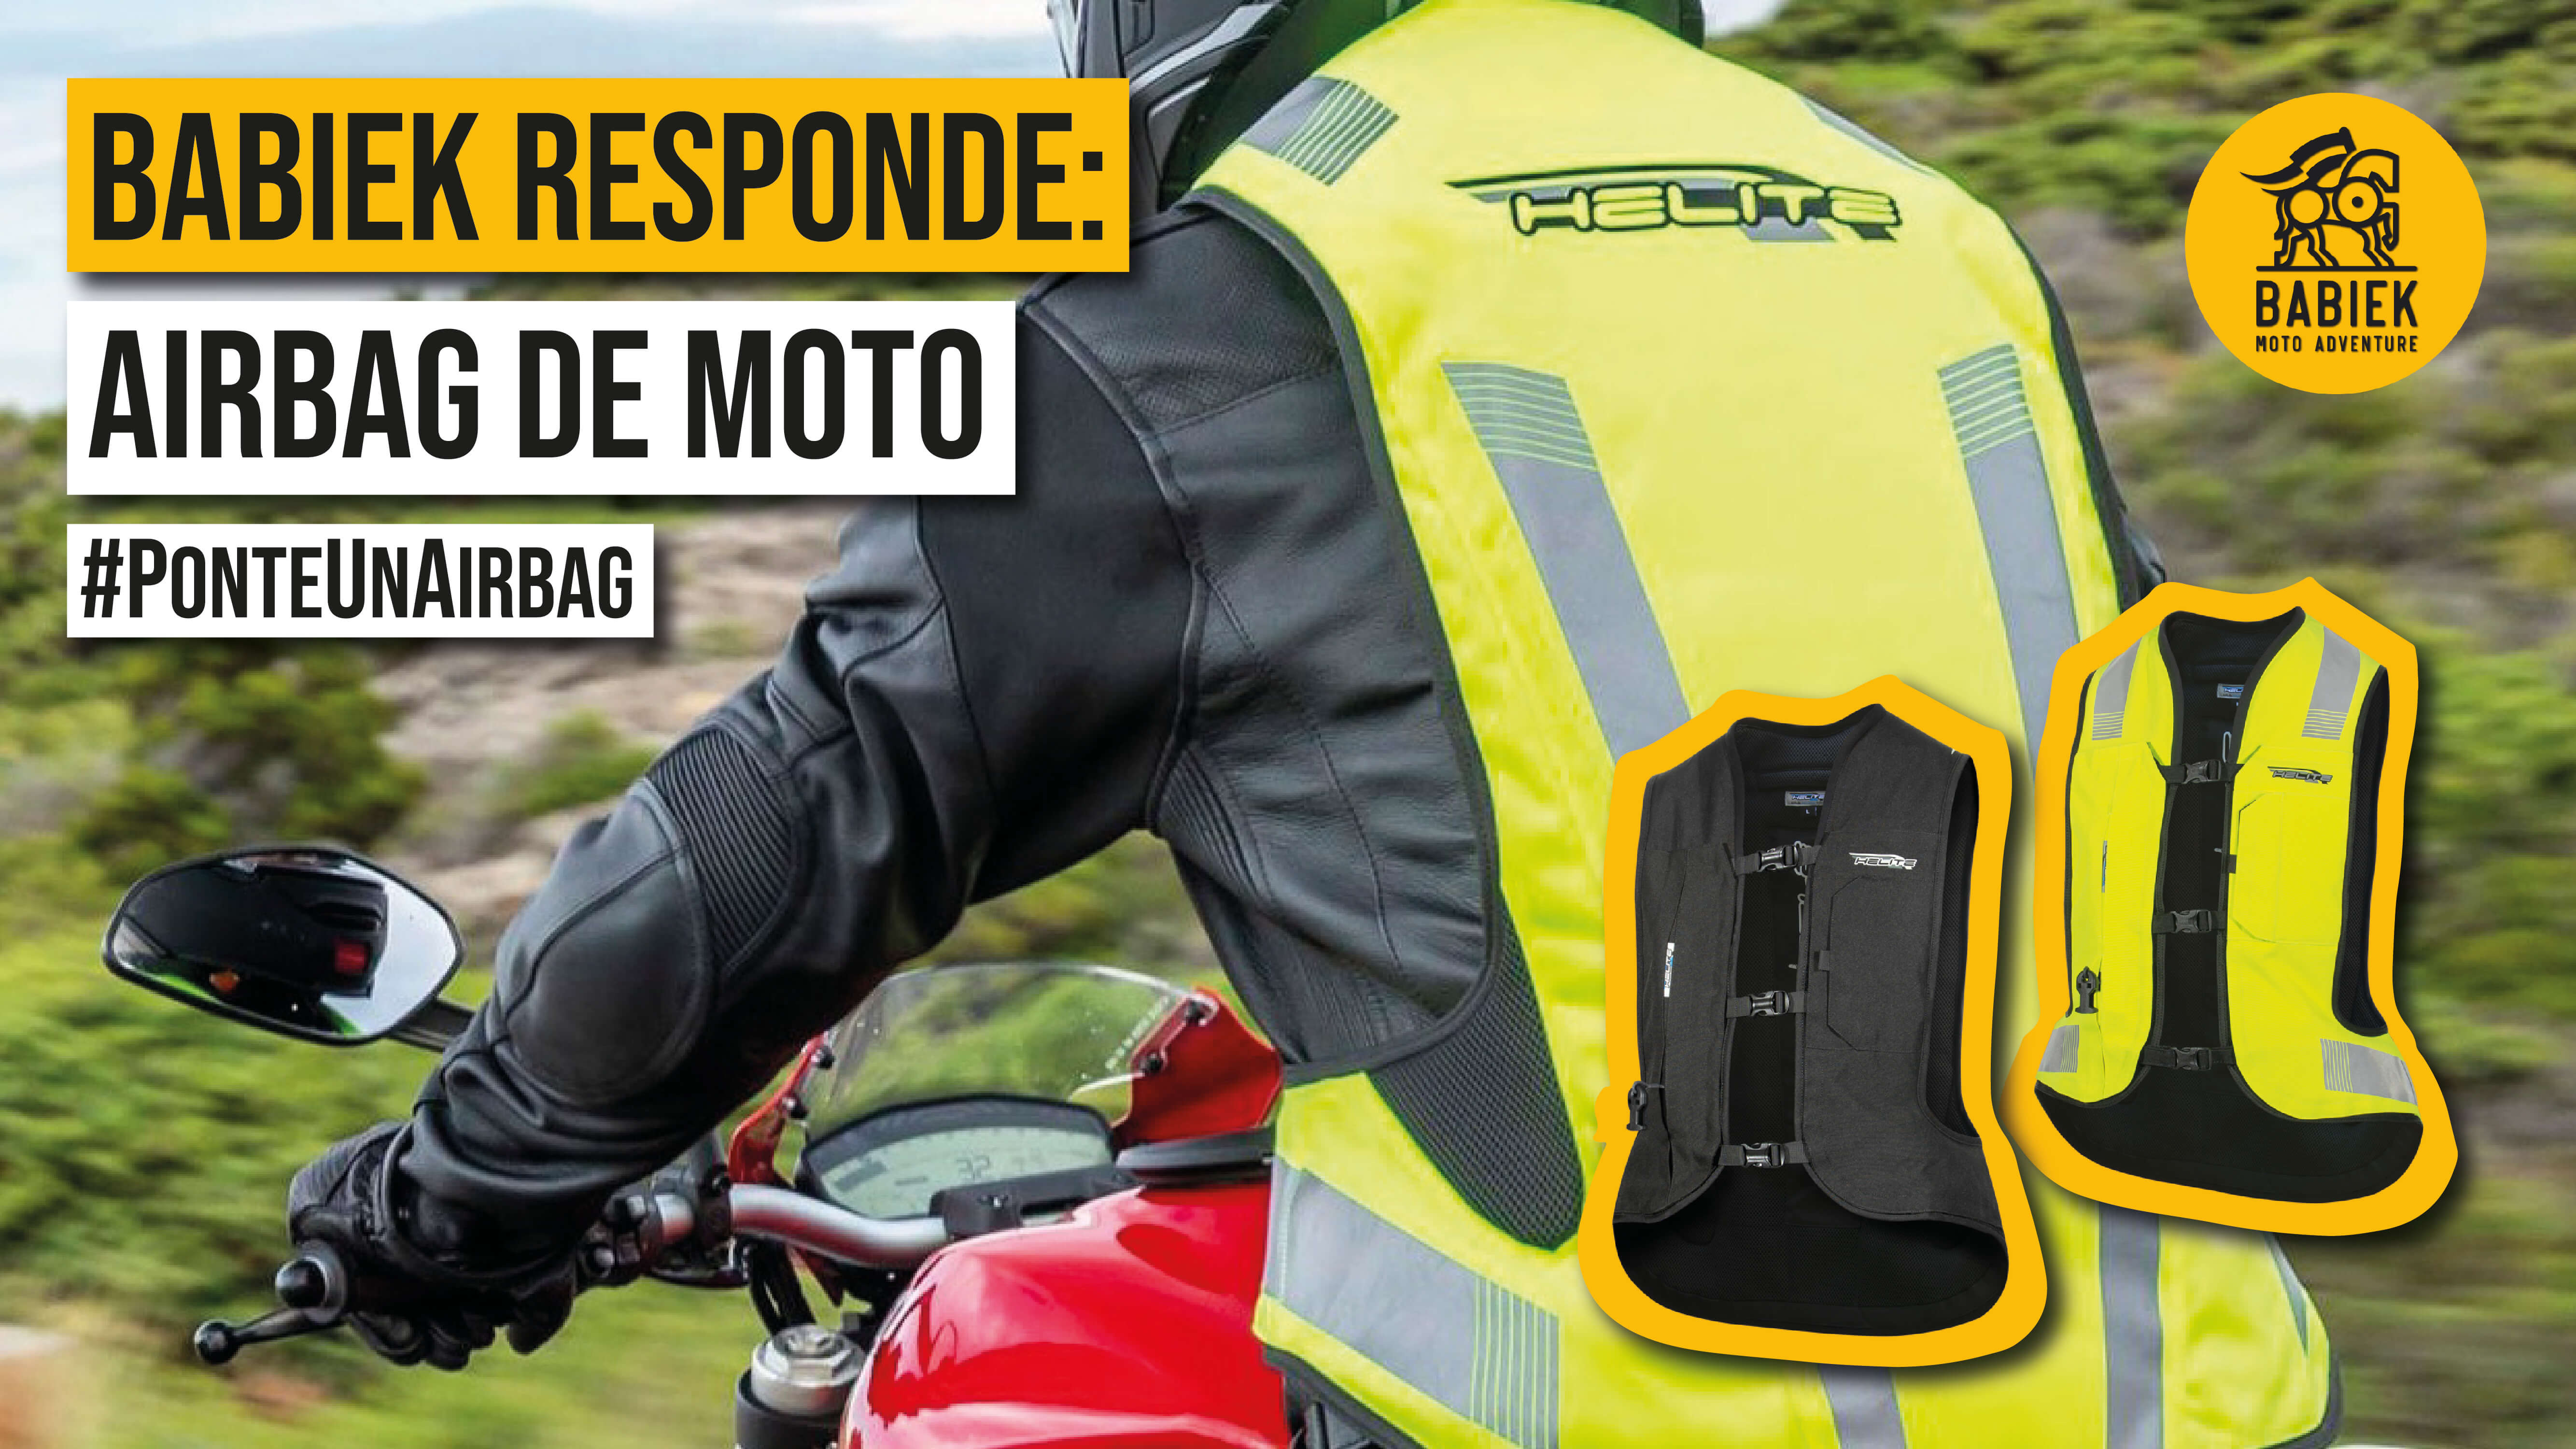 Chaleco Airbag Motociclista Colombia - Los Mejores Chalecos Airbag